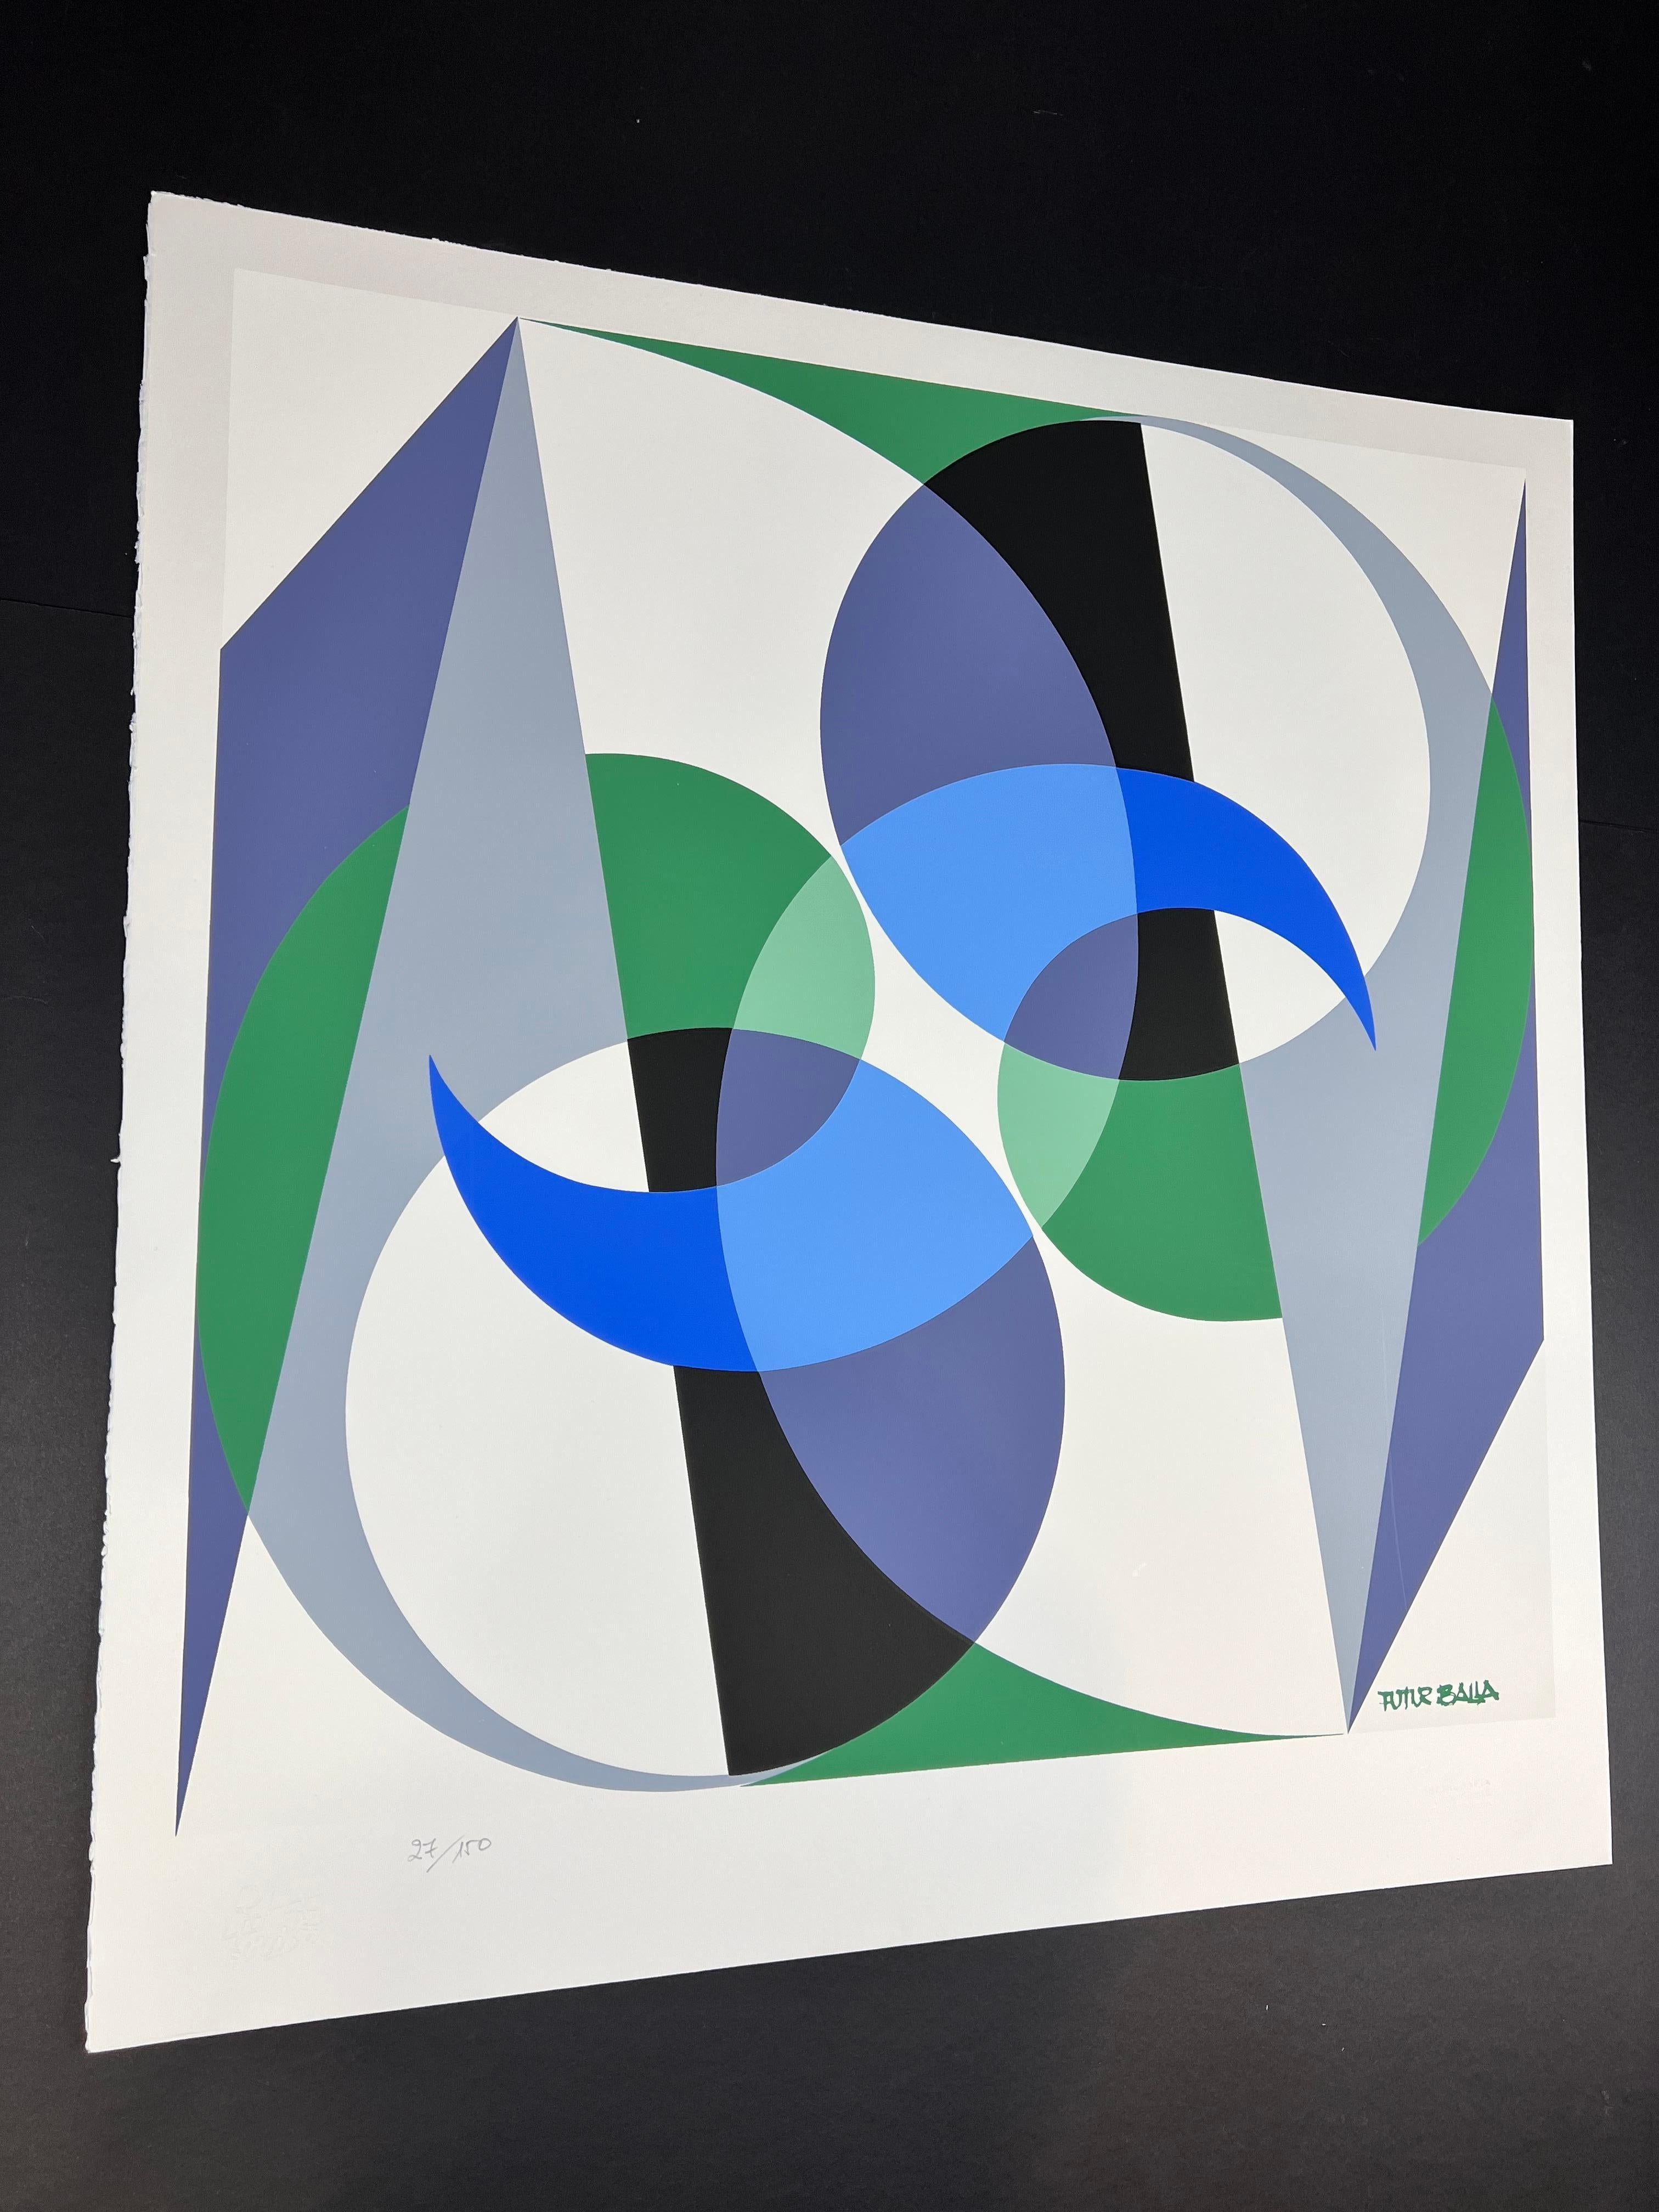 Screenprint on Fabriano Rosaspina paper
Posthumous Edition issued by Balla Archive
Limited Edition of 150 copies
Numbered in pencil on the lower left 53/150
paper size: 74 x 70 cm
excellent conditions
Blind stamps as a signature “Balla Futurista”